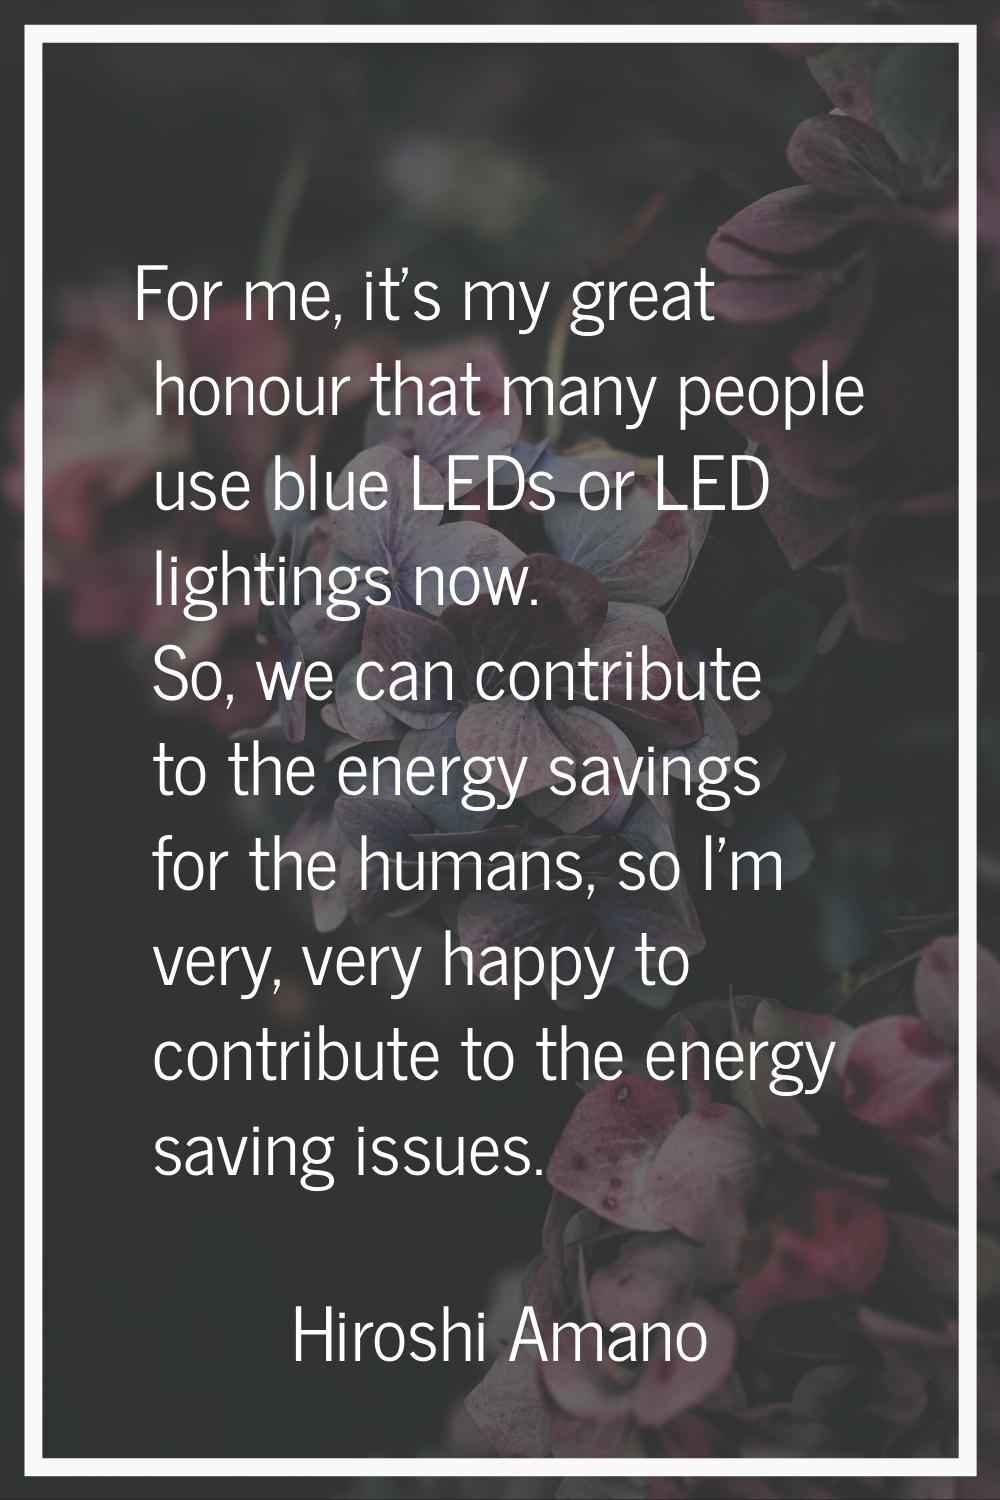 For me, it's my great honour that many people use blue LEDs or LED lightings now. So, we can contri